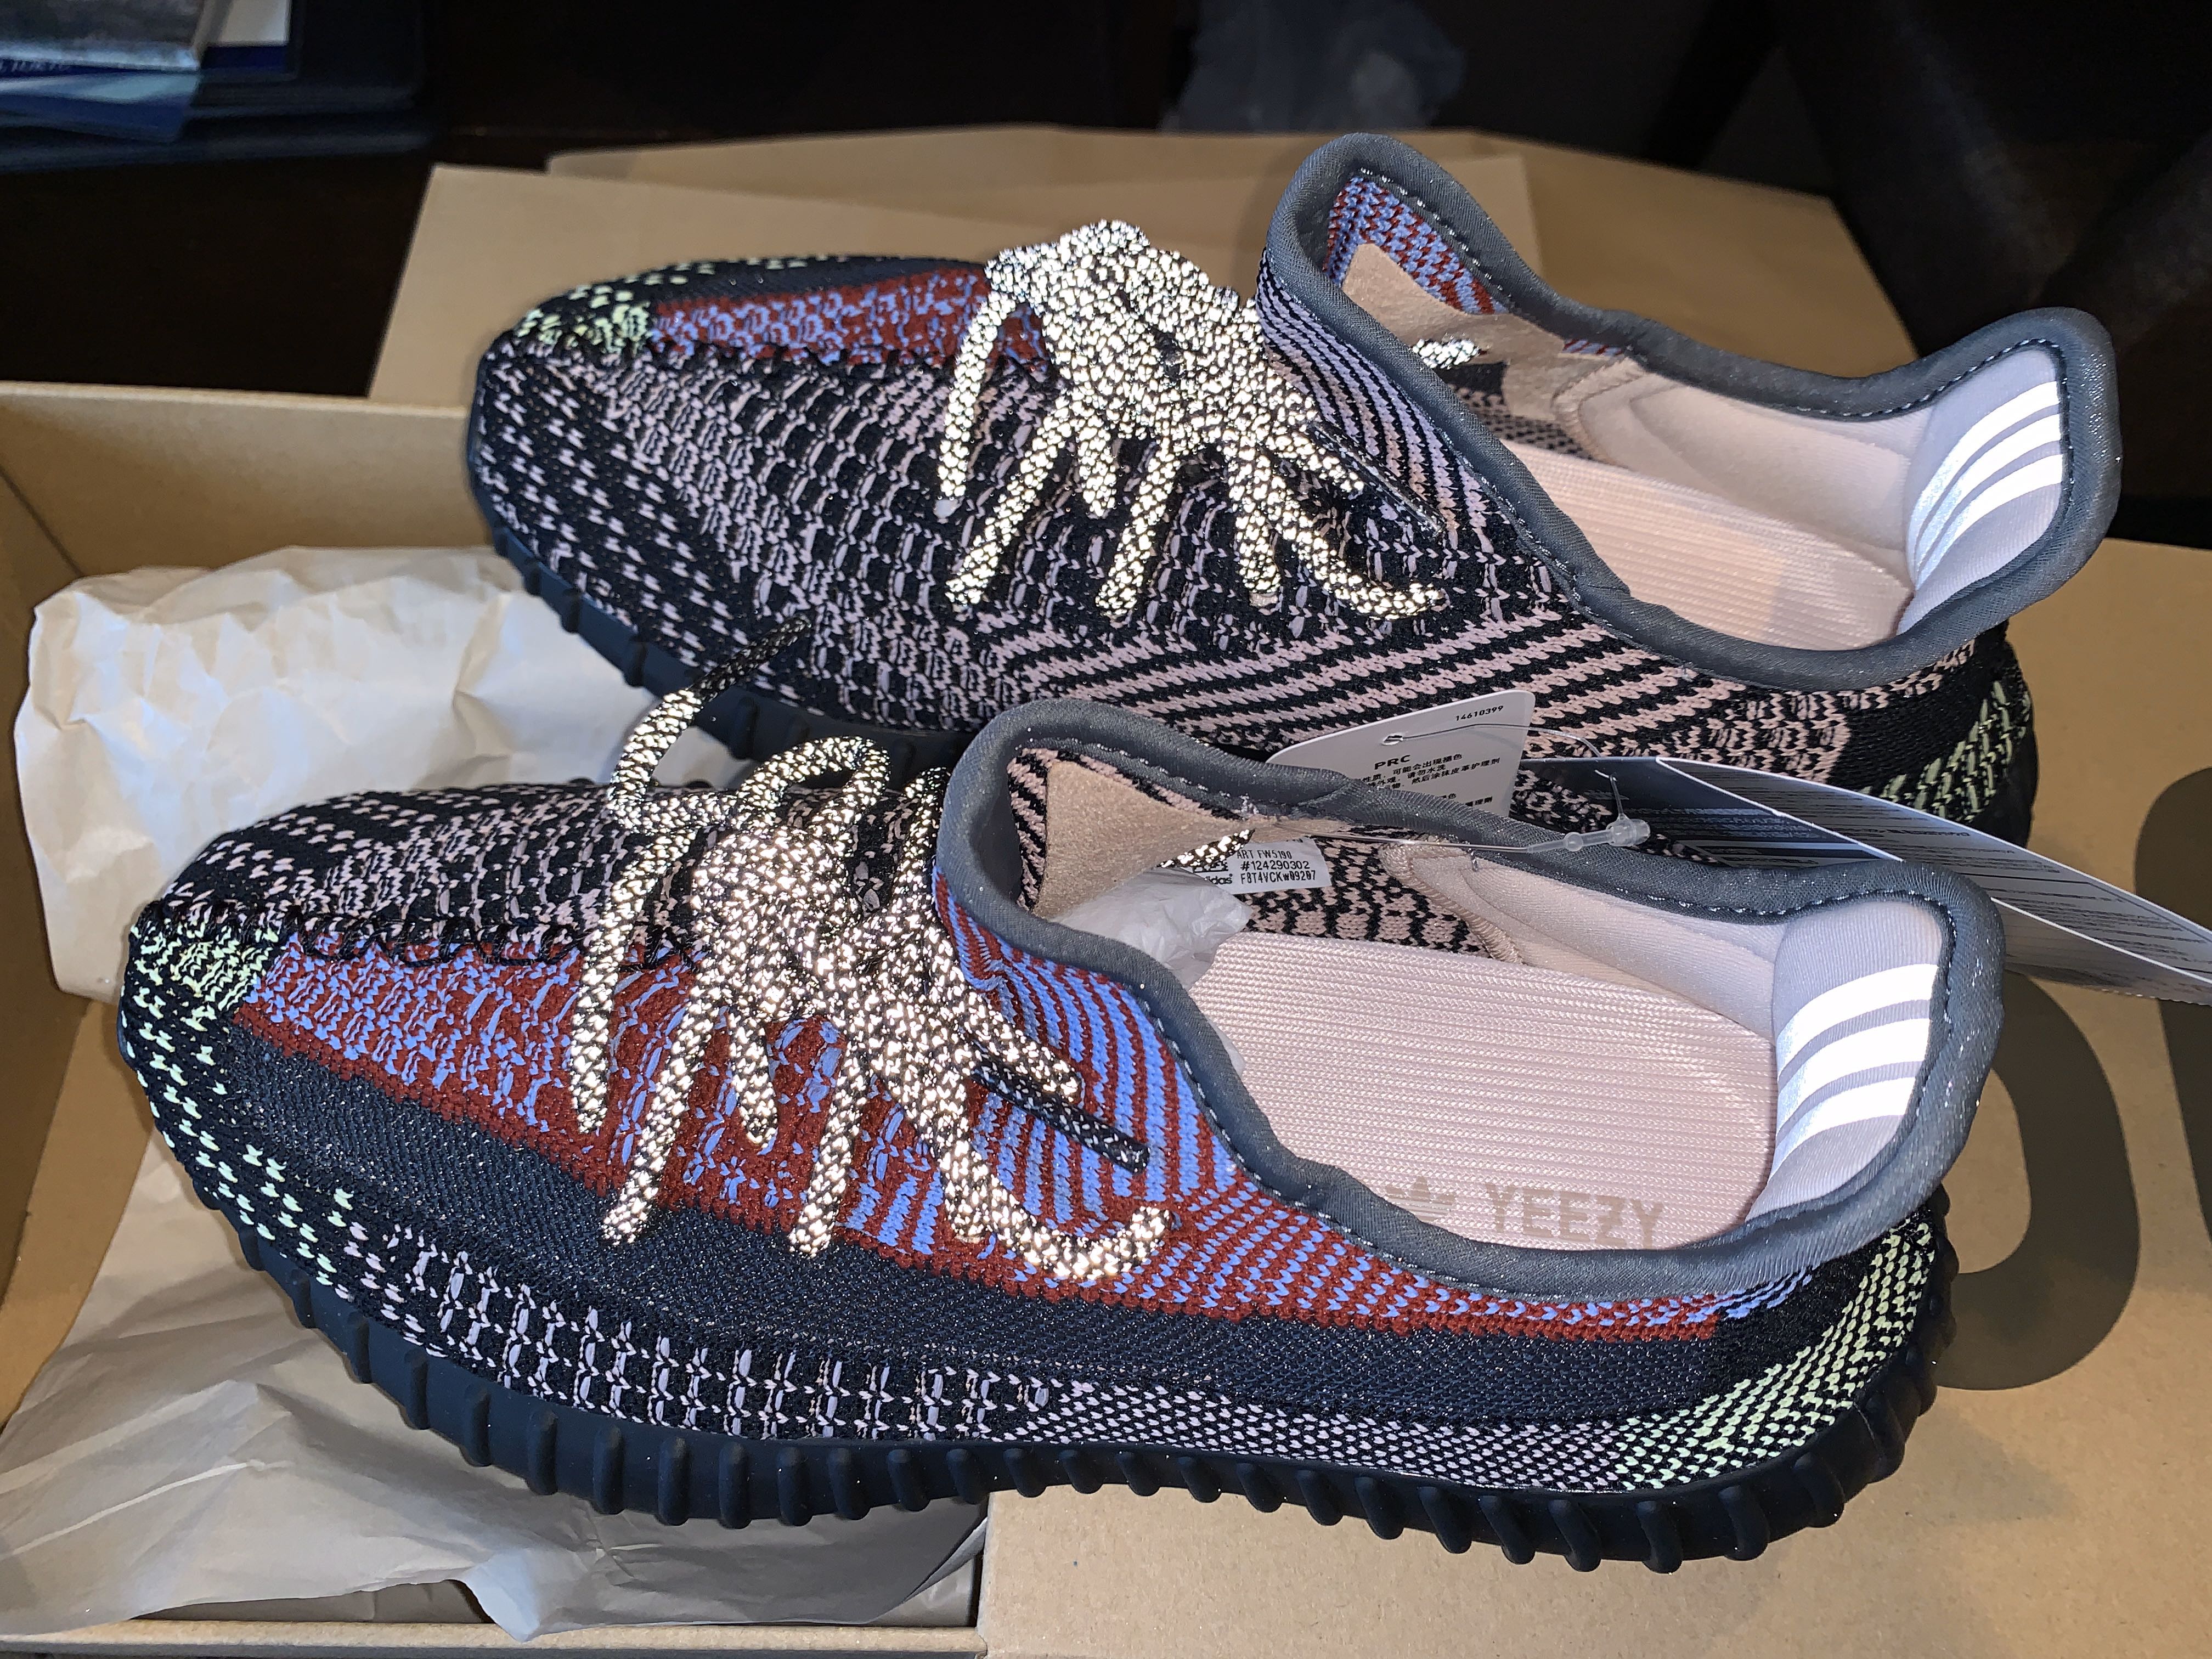 From Tokyo Adidas Yeezy Boost 350 V2 